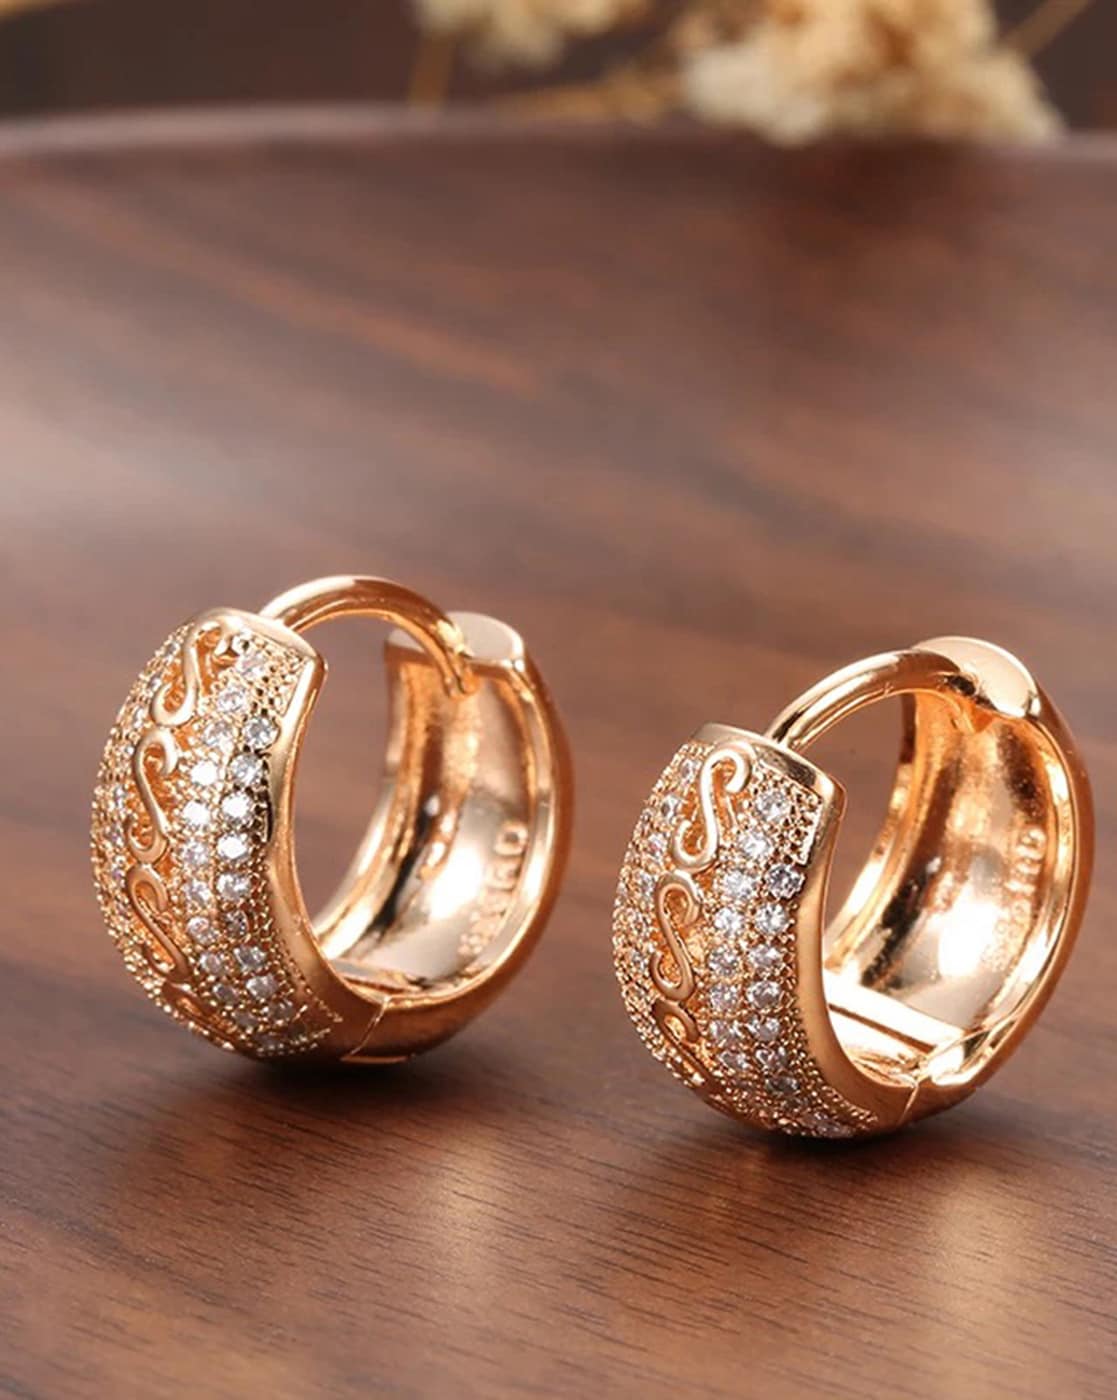 Buy Traditional Gold Style Swan Round Ring Type Bali Earring for Women